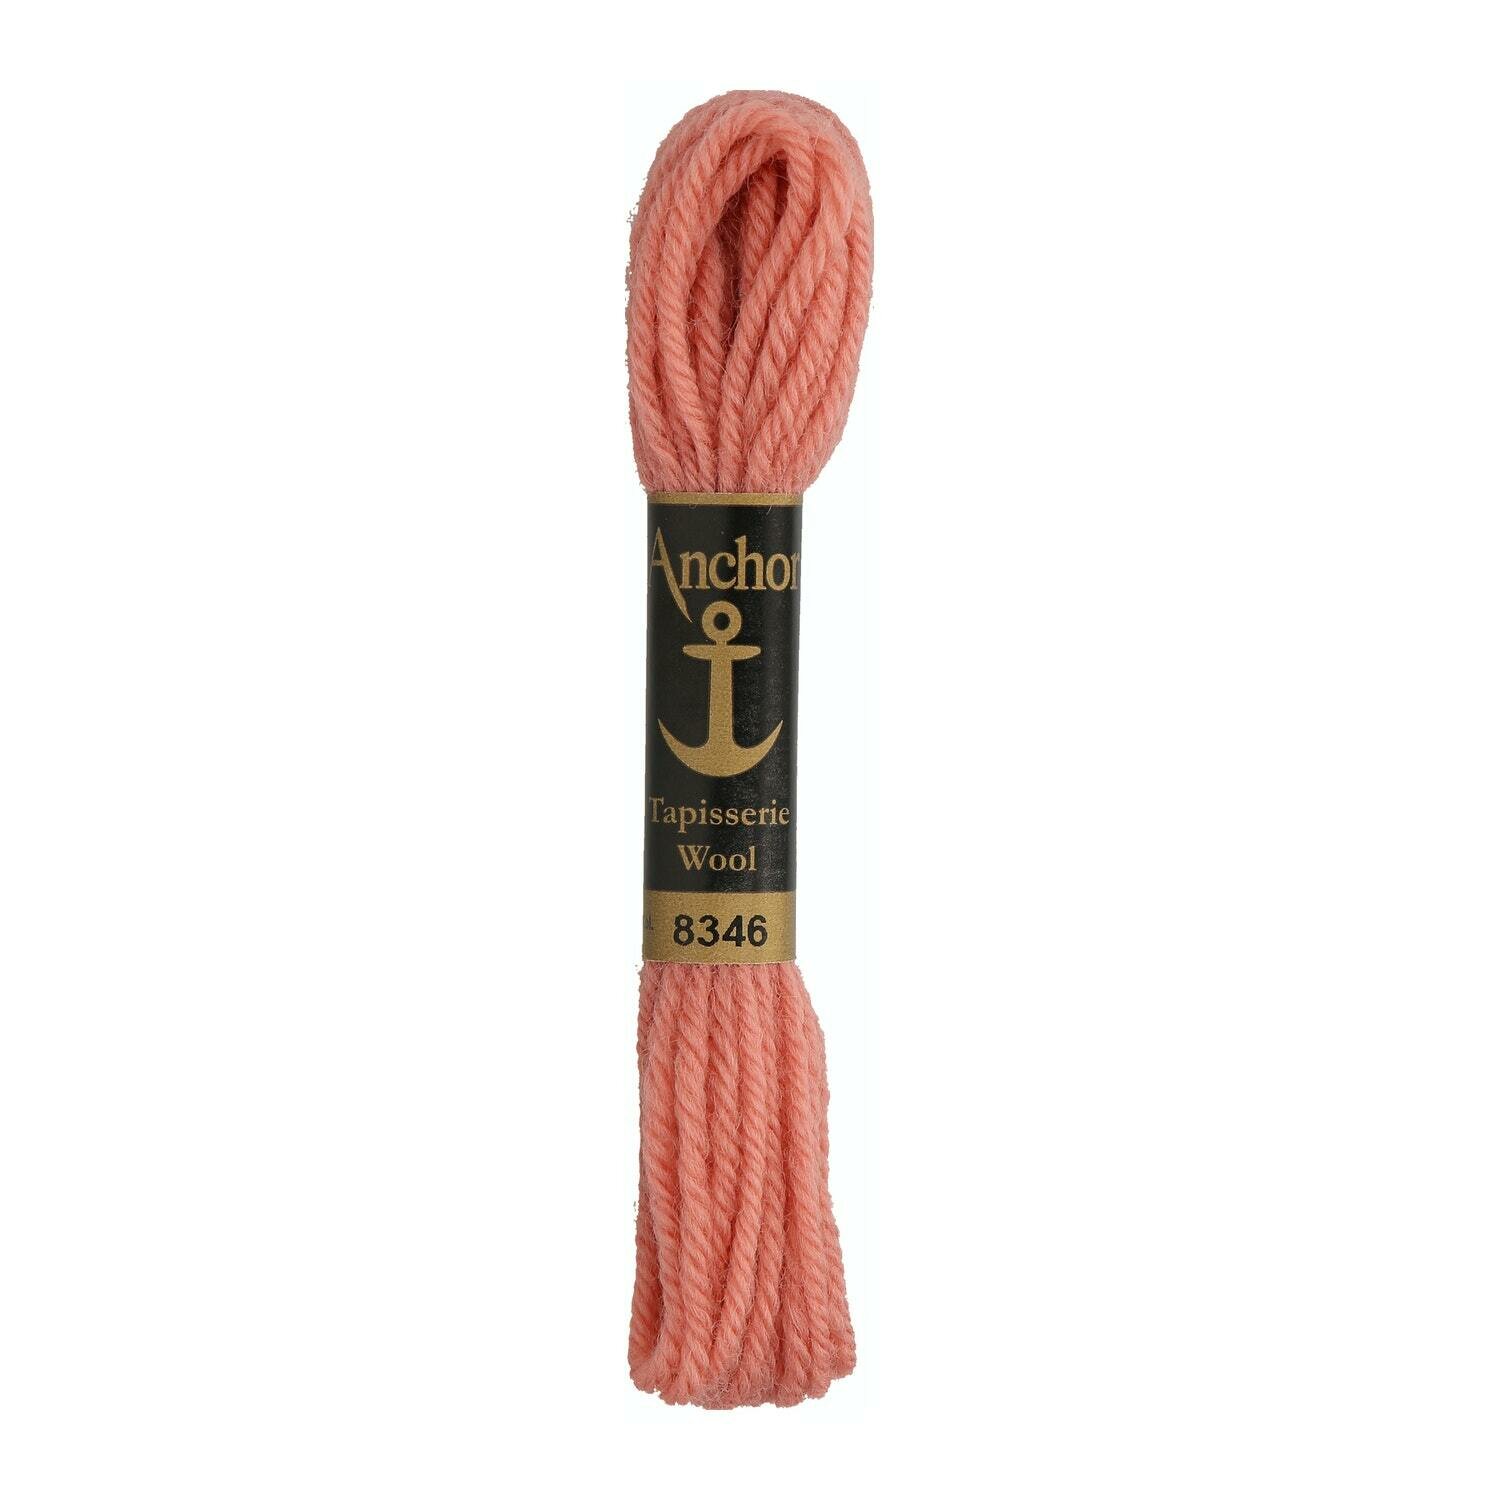 Anchor Tapisserie Wool # 08346